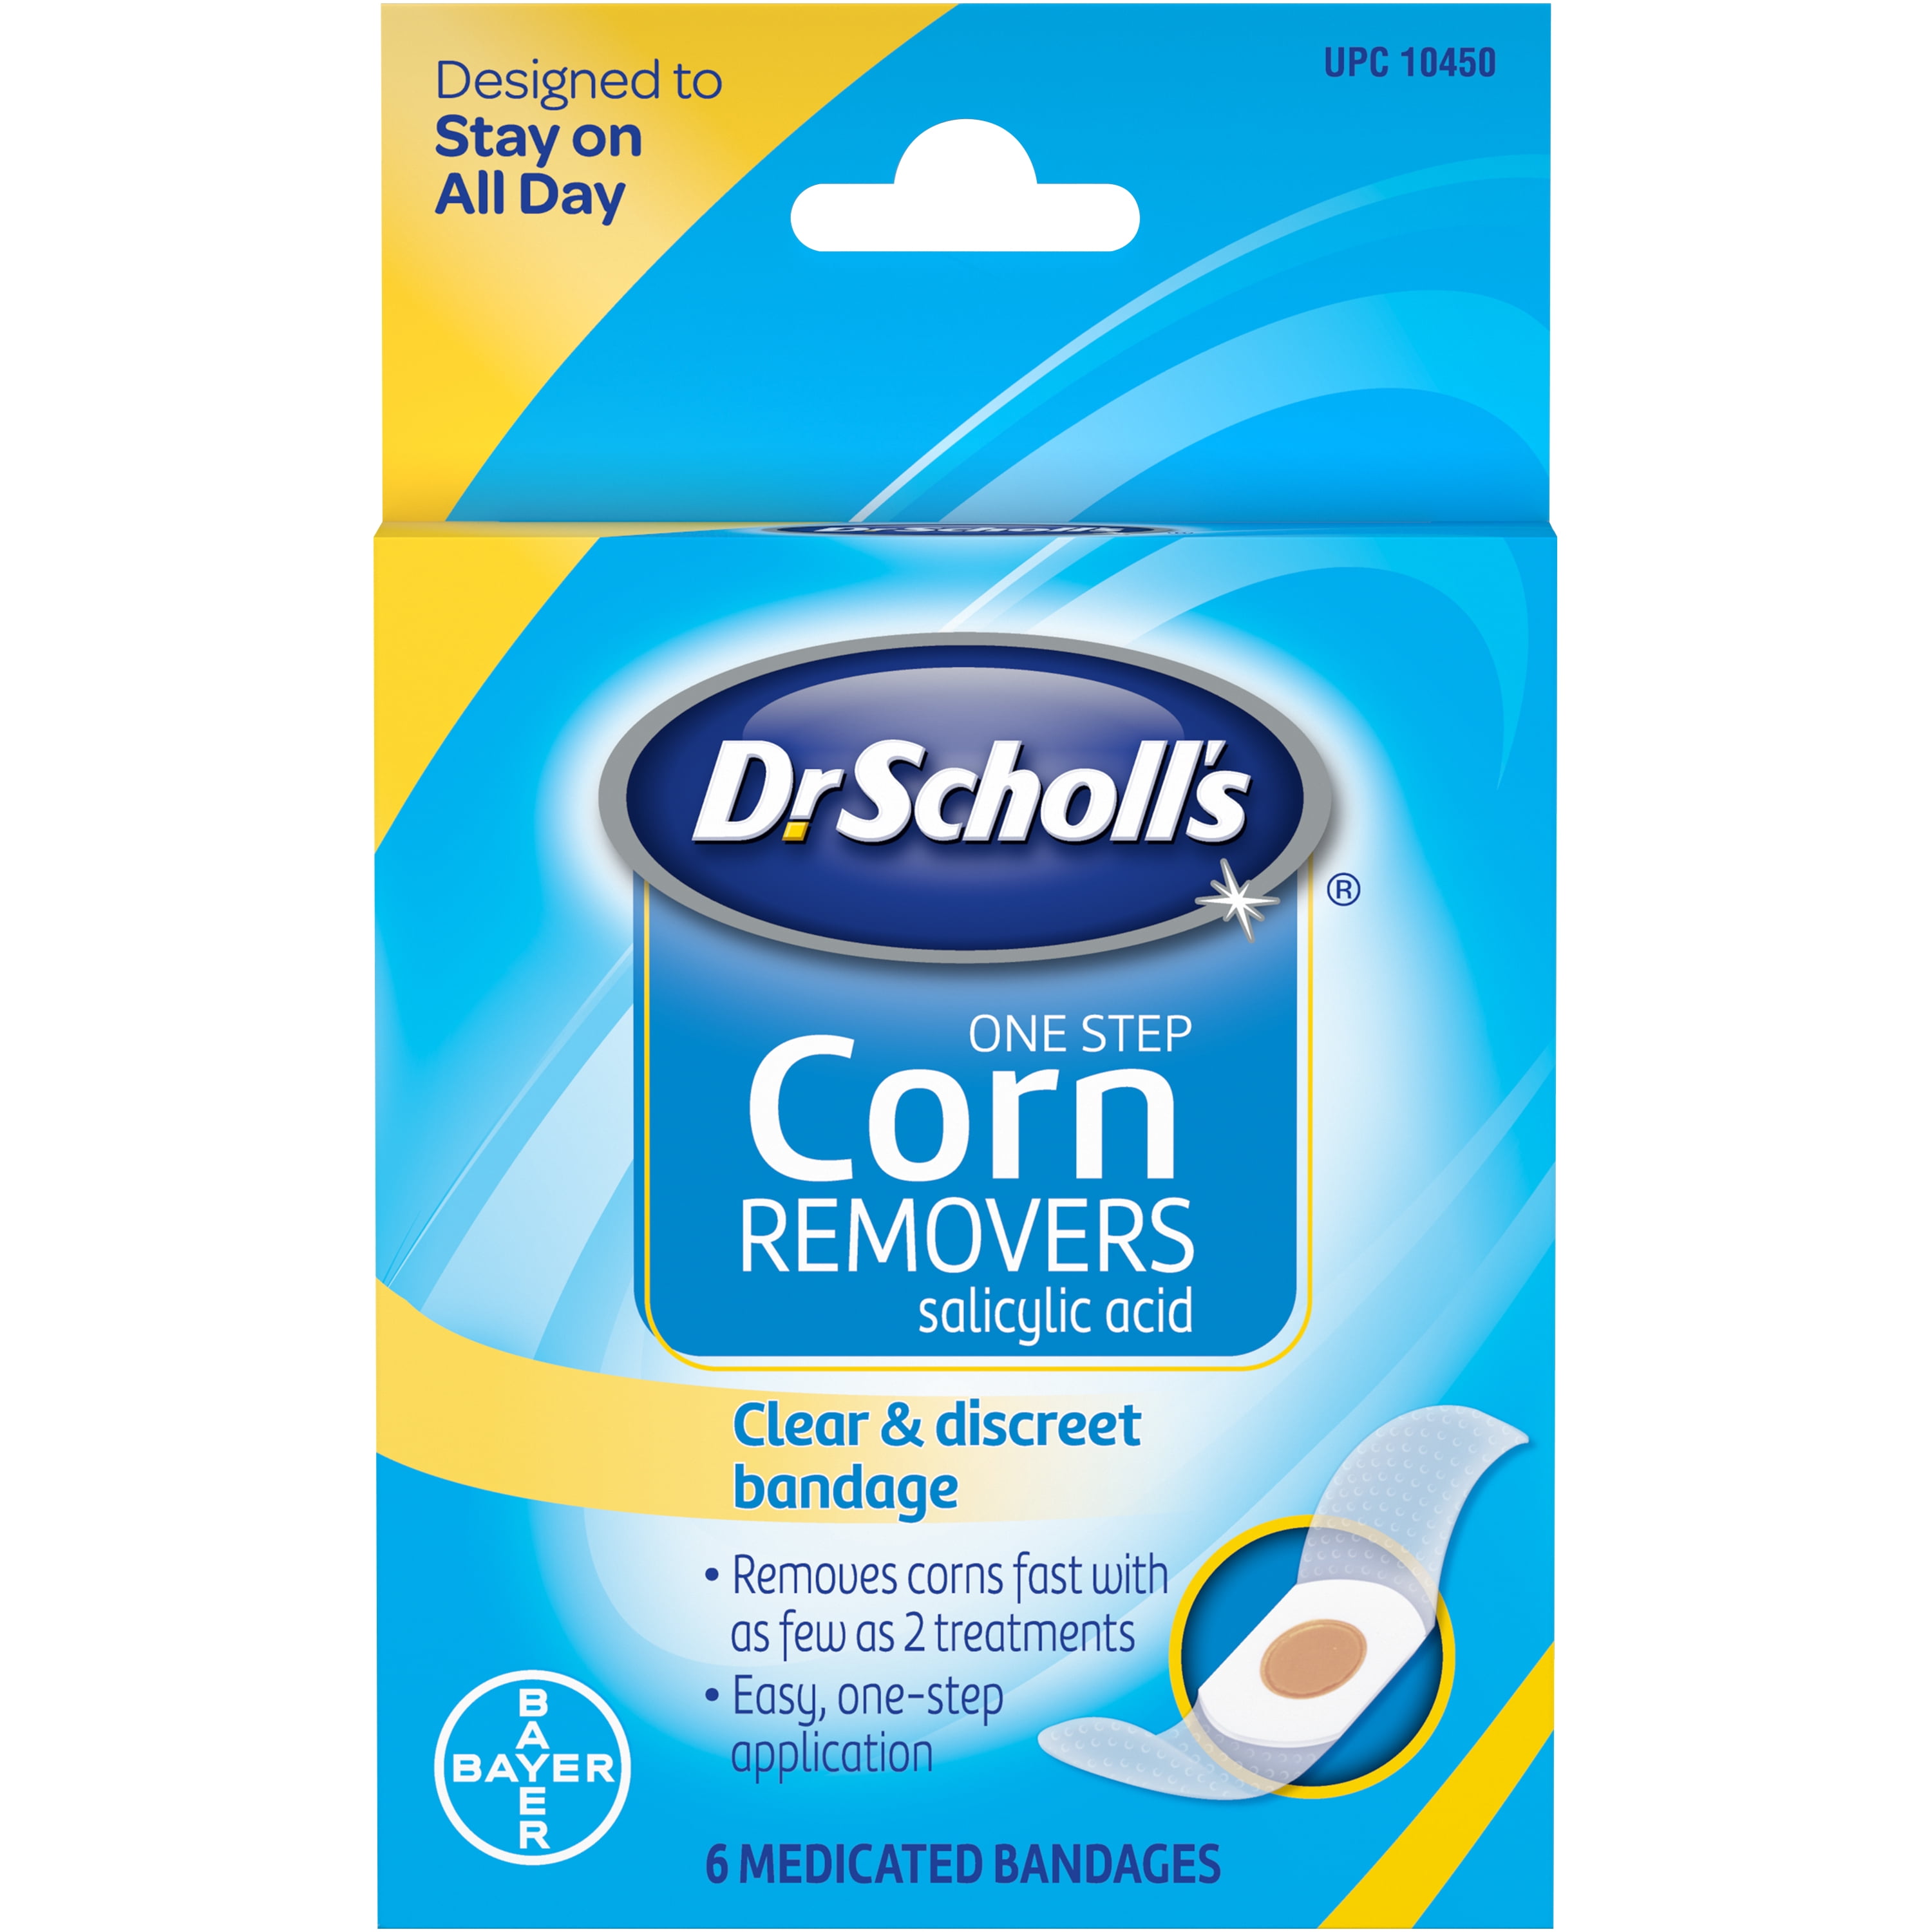 dr scholls products